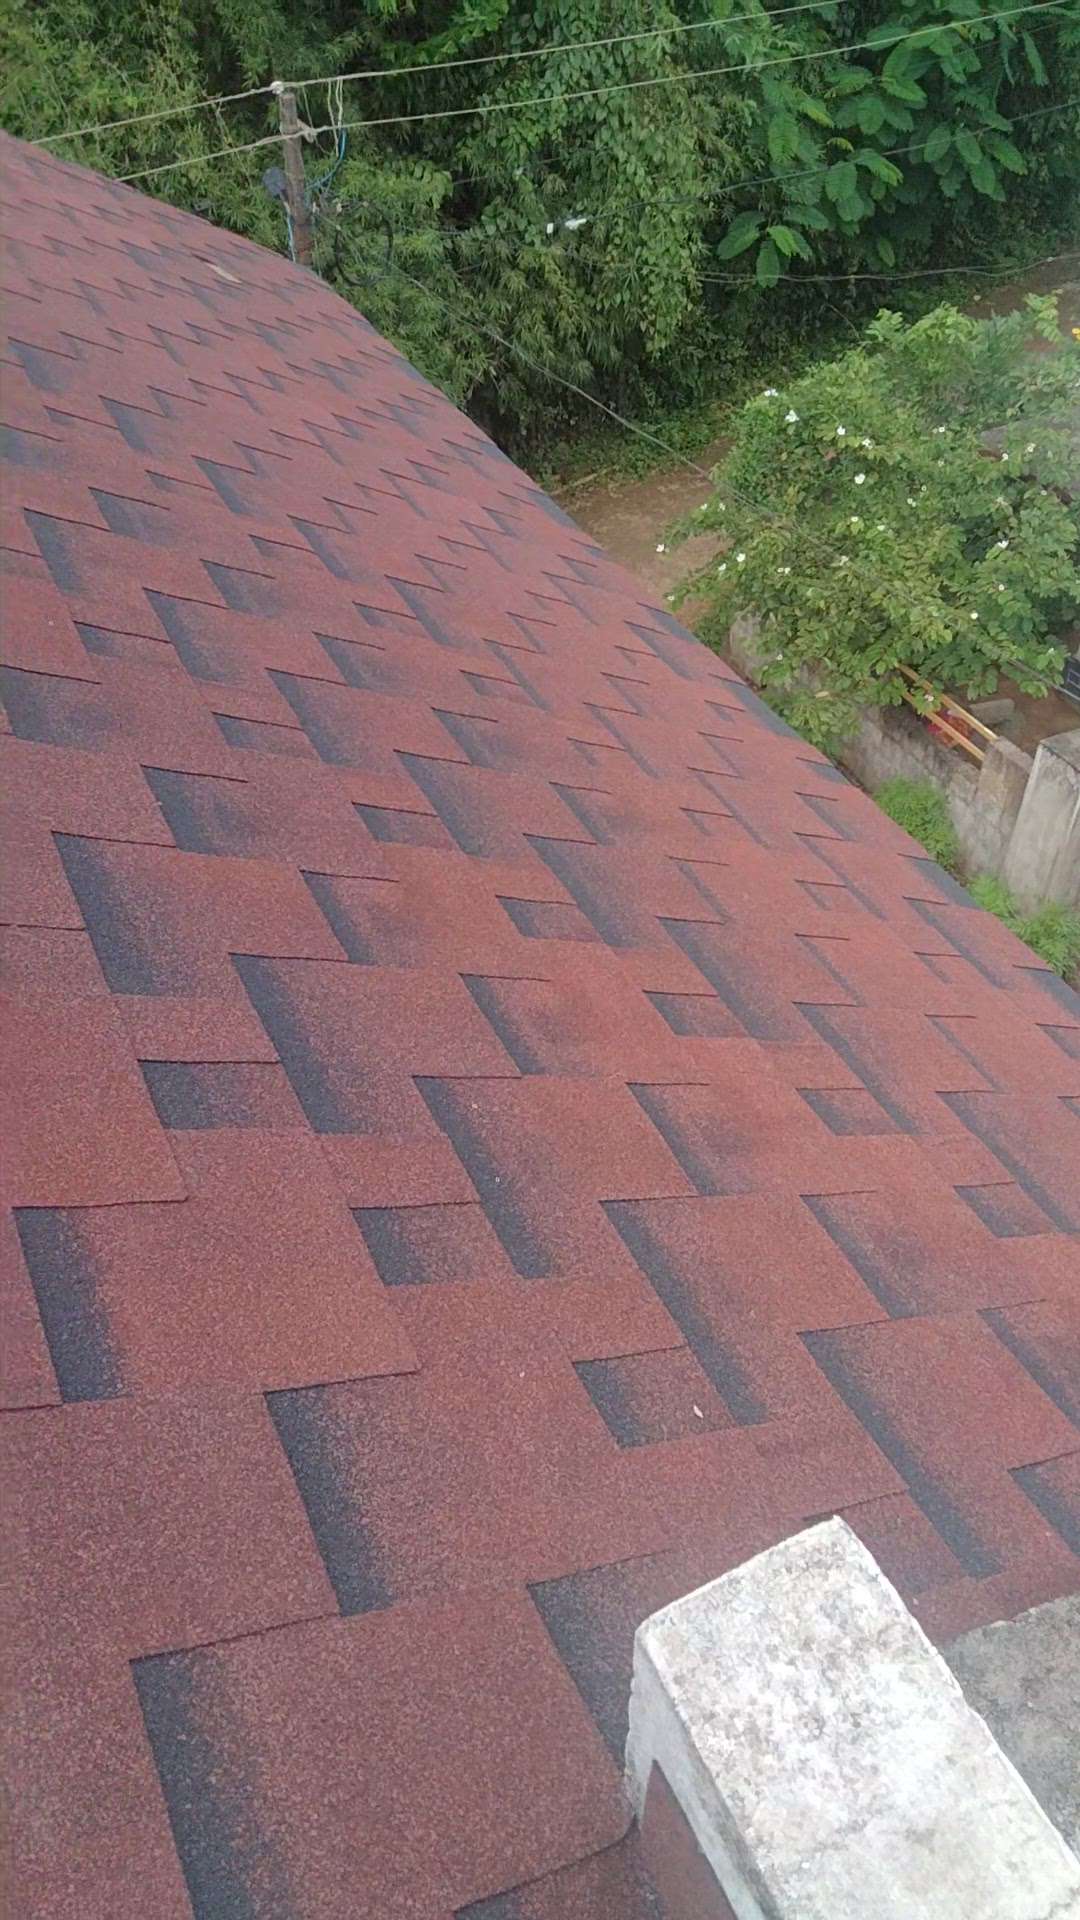 PRIMIUM SHINGLES
MALABAR ROOF TILES
SHINGLES WORK COMPLETED SITE OTTAPALAM
CALL NOW : 9544193838